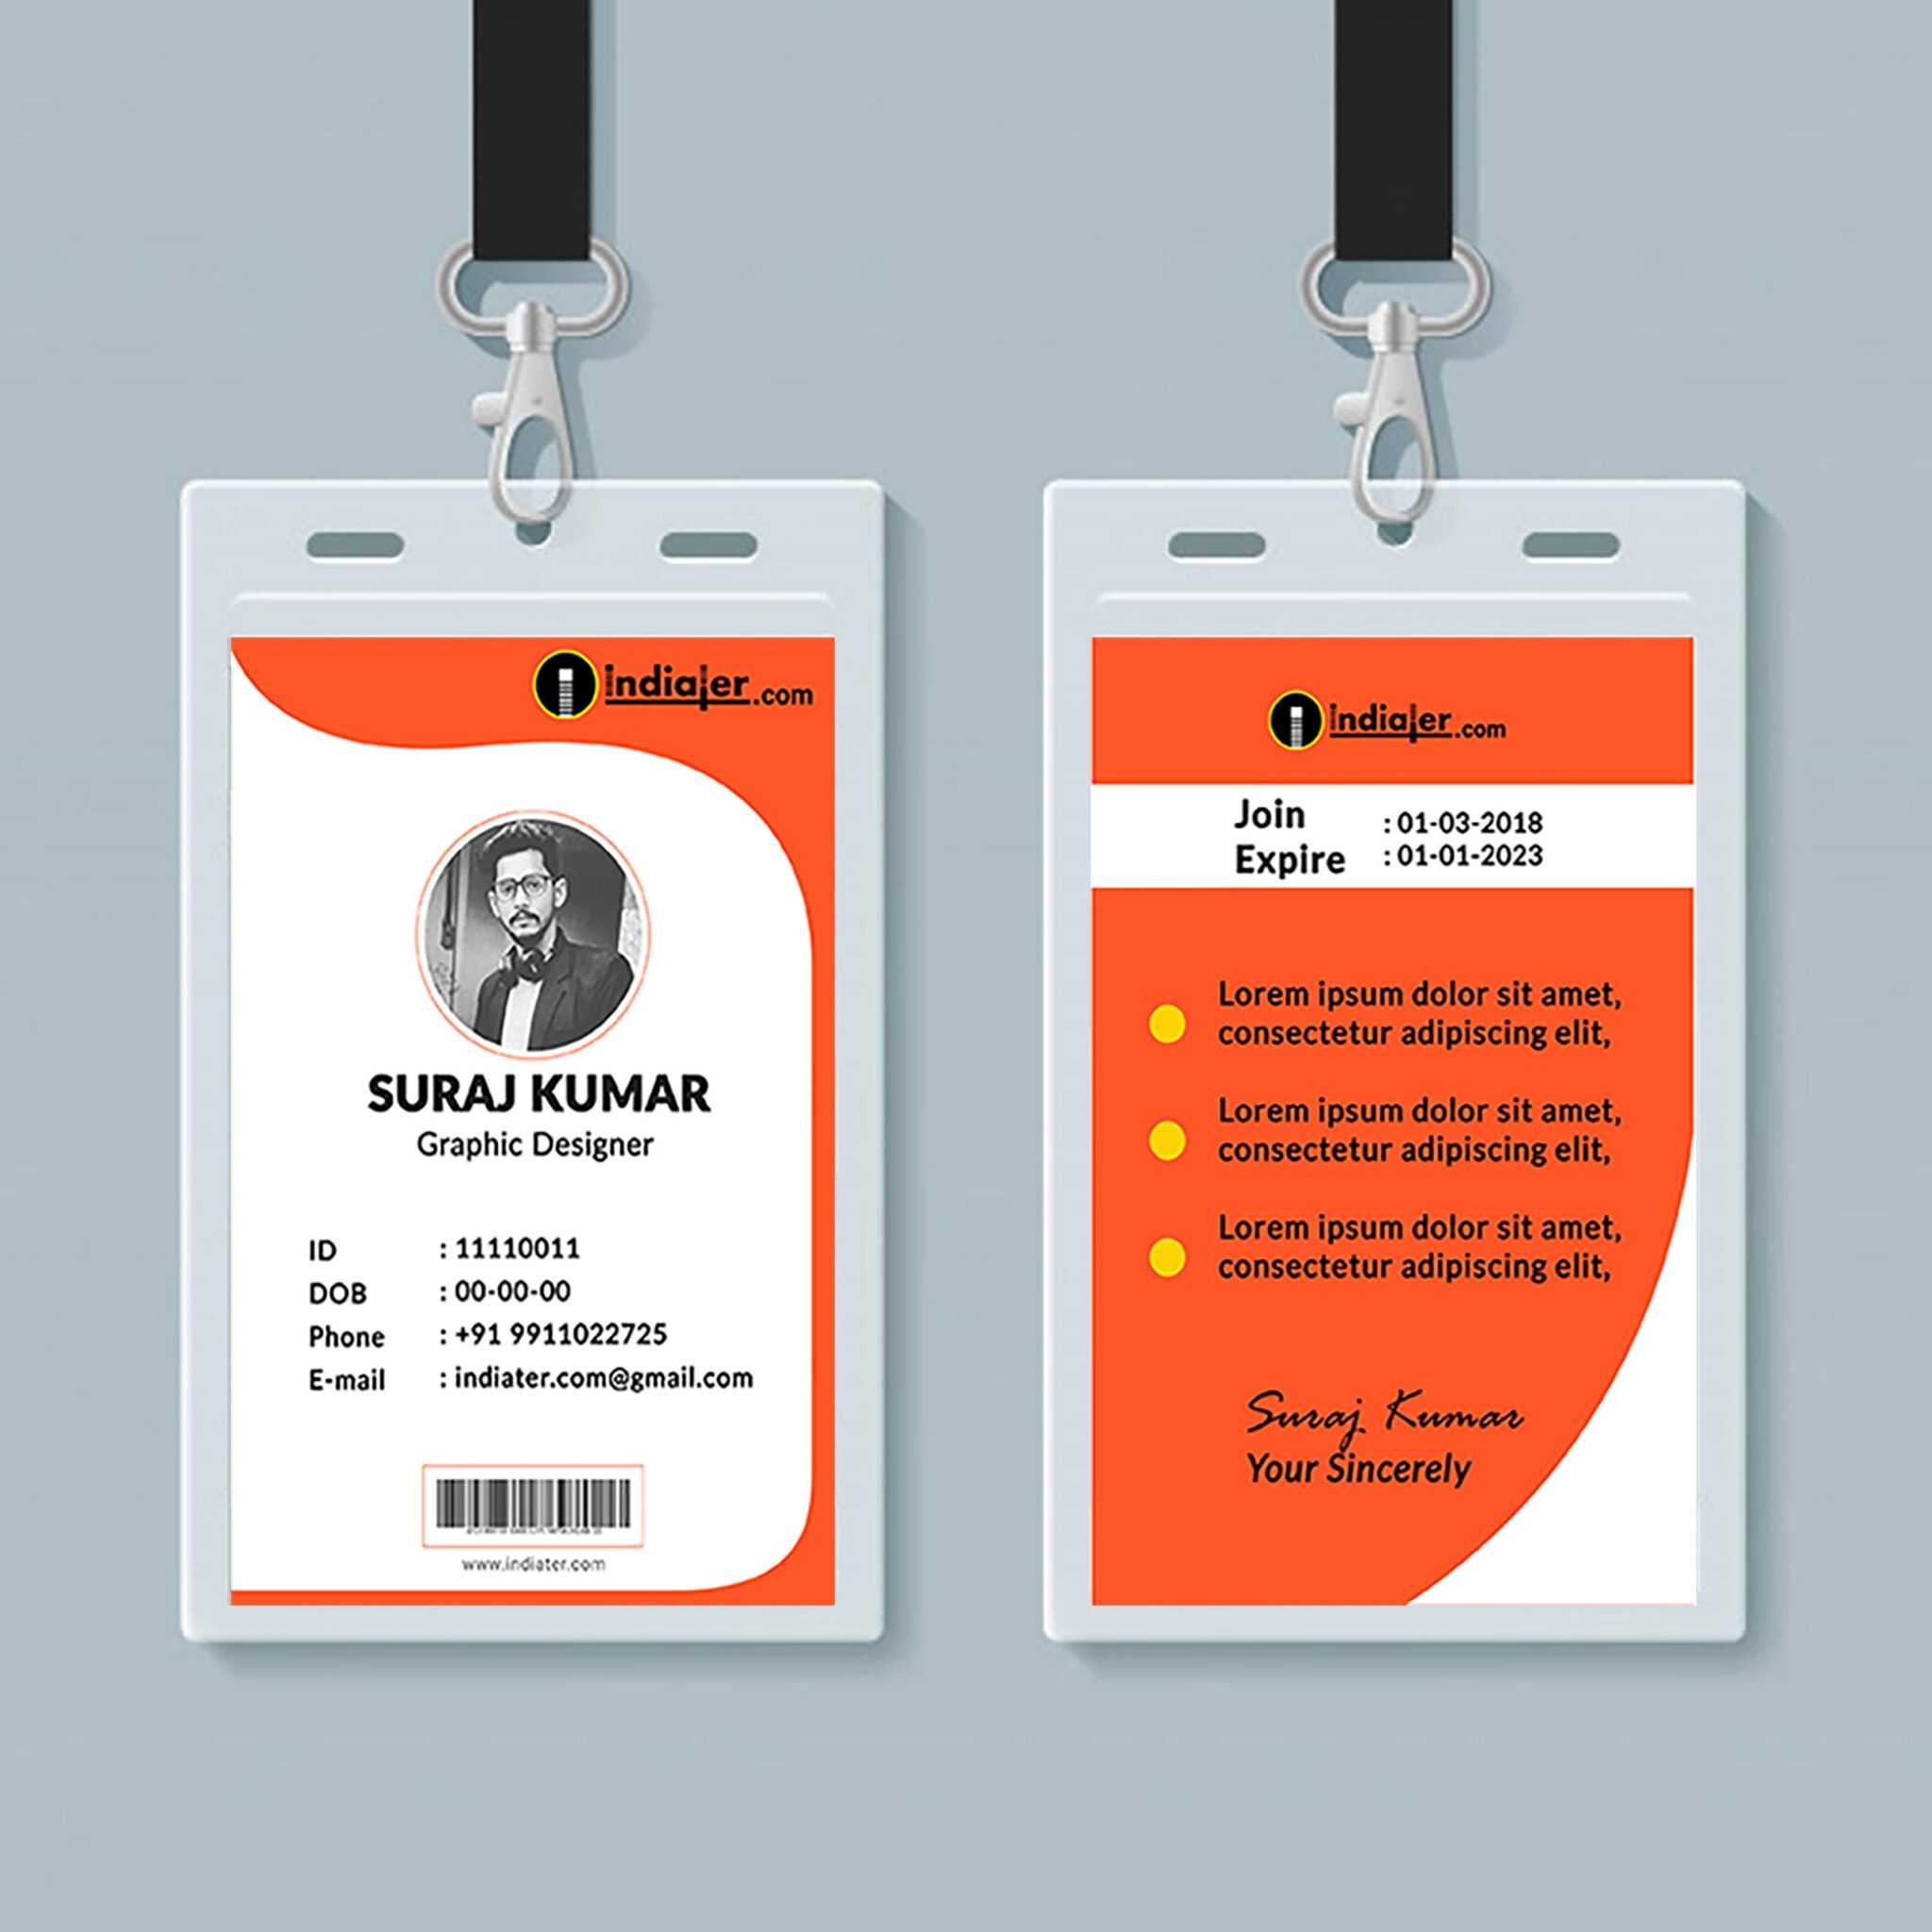 013-student-id-card-design-template-psd-free-download-pertaining-to